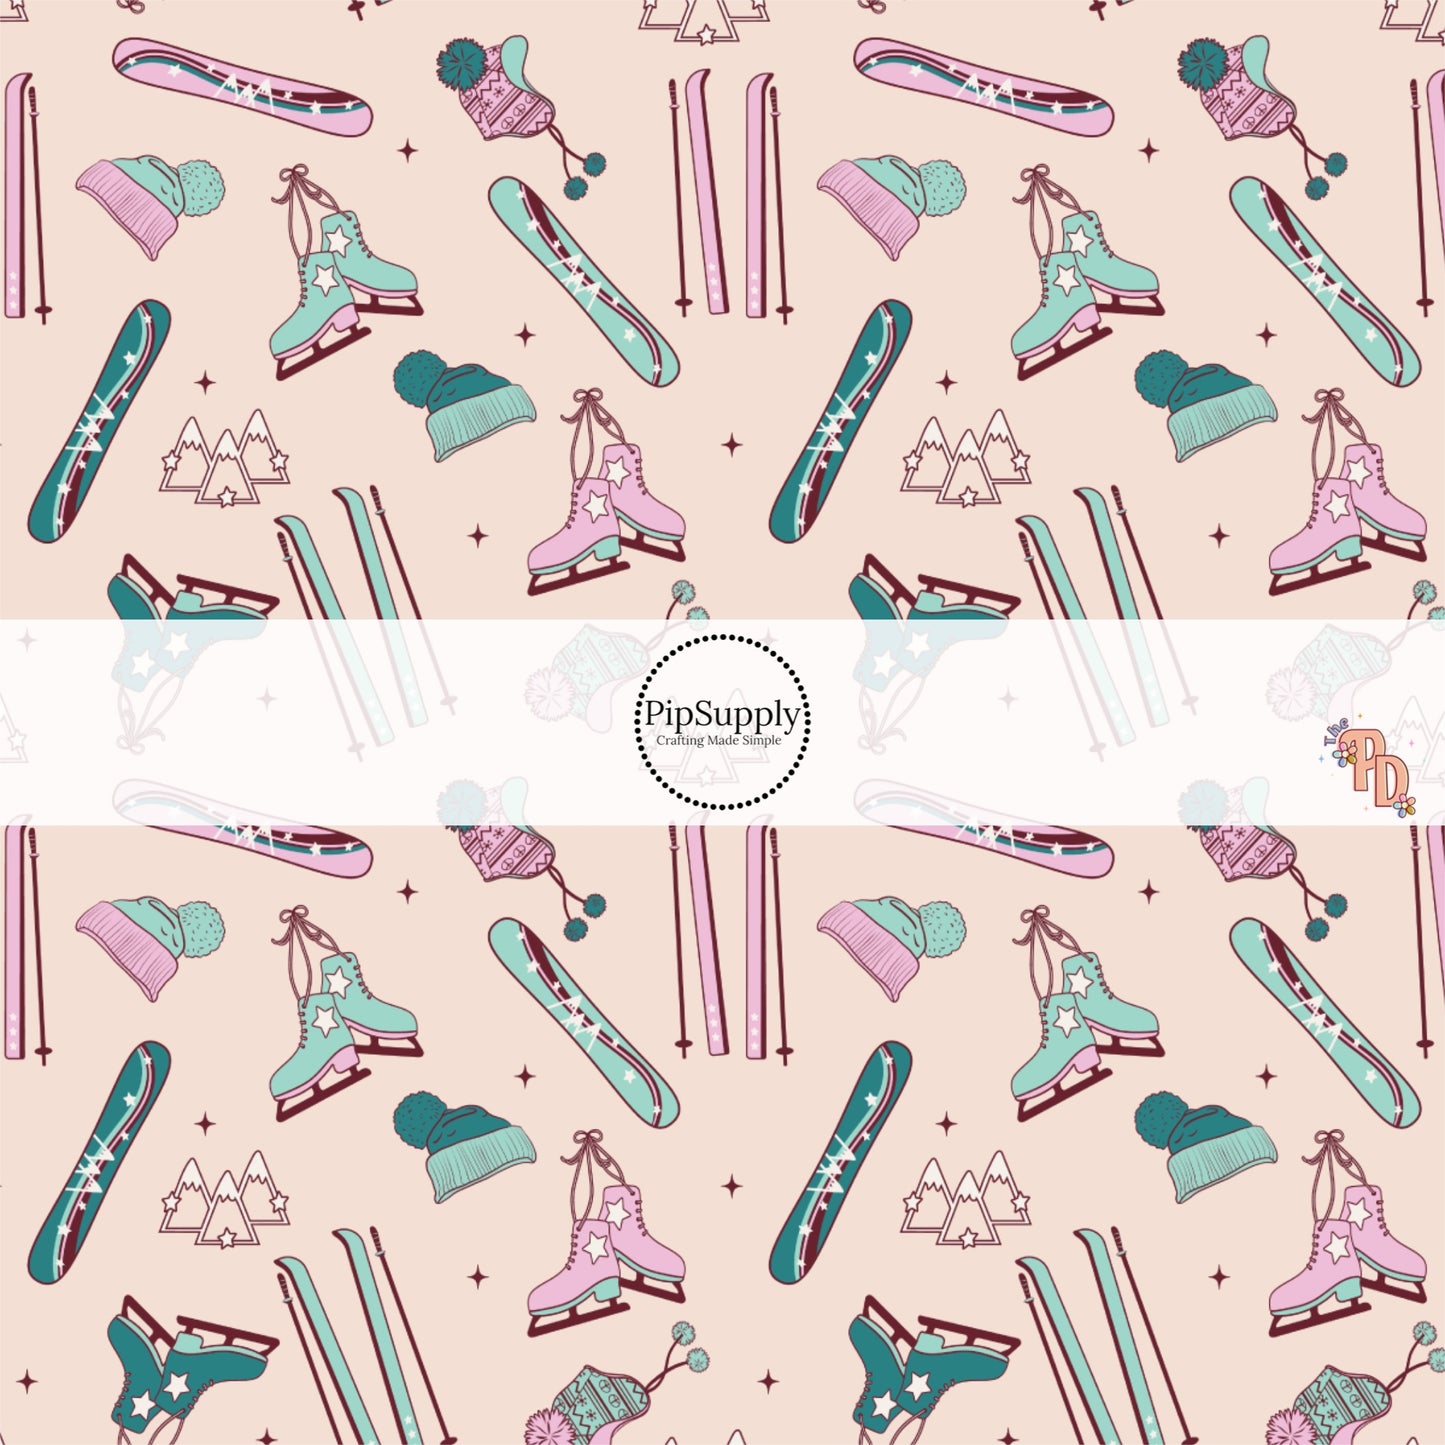 Cream fabric by the yard with purple and turquoise skis and ice-skates.